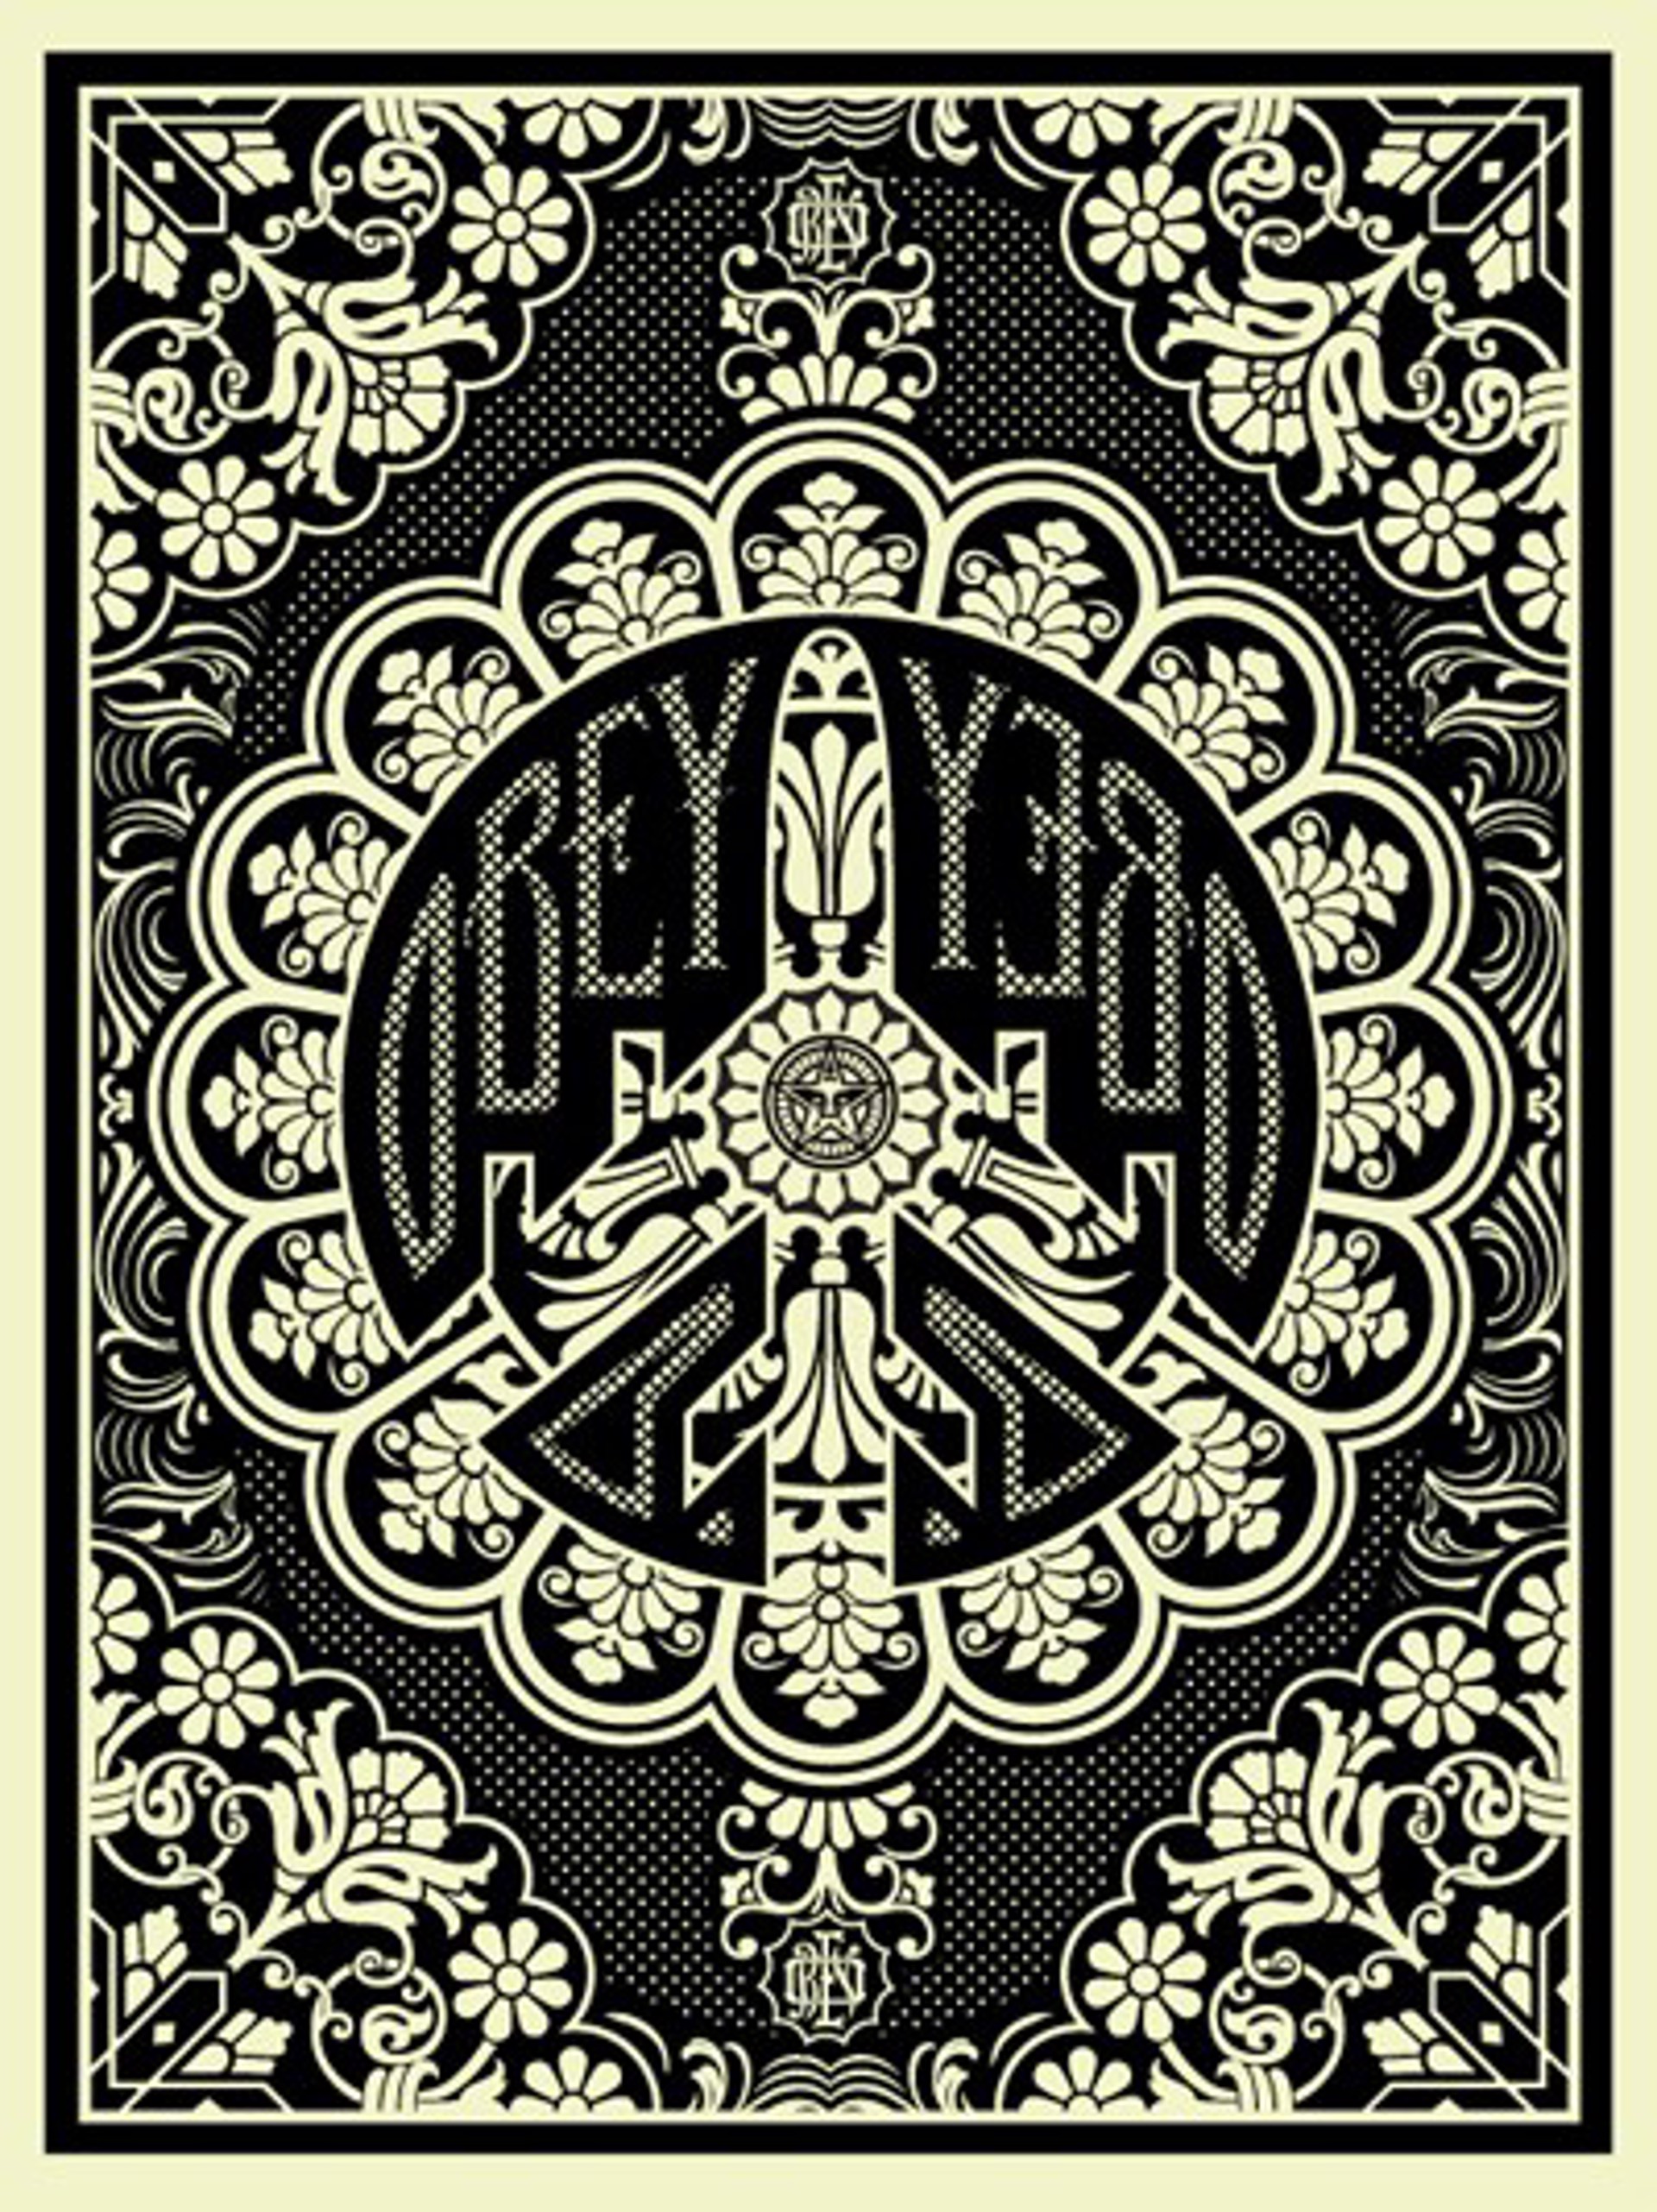 PEACE BOMBER (BLACK) by Shepard Fairey